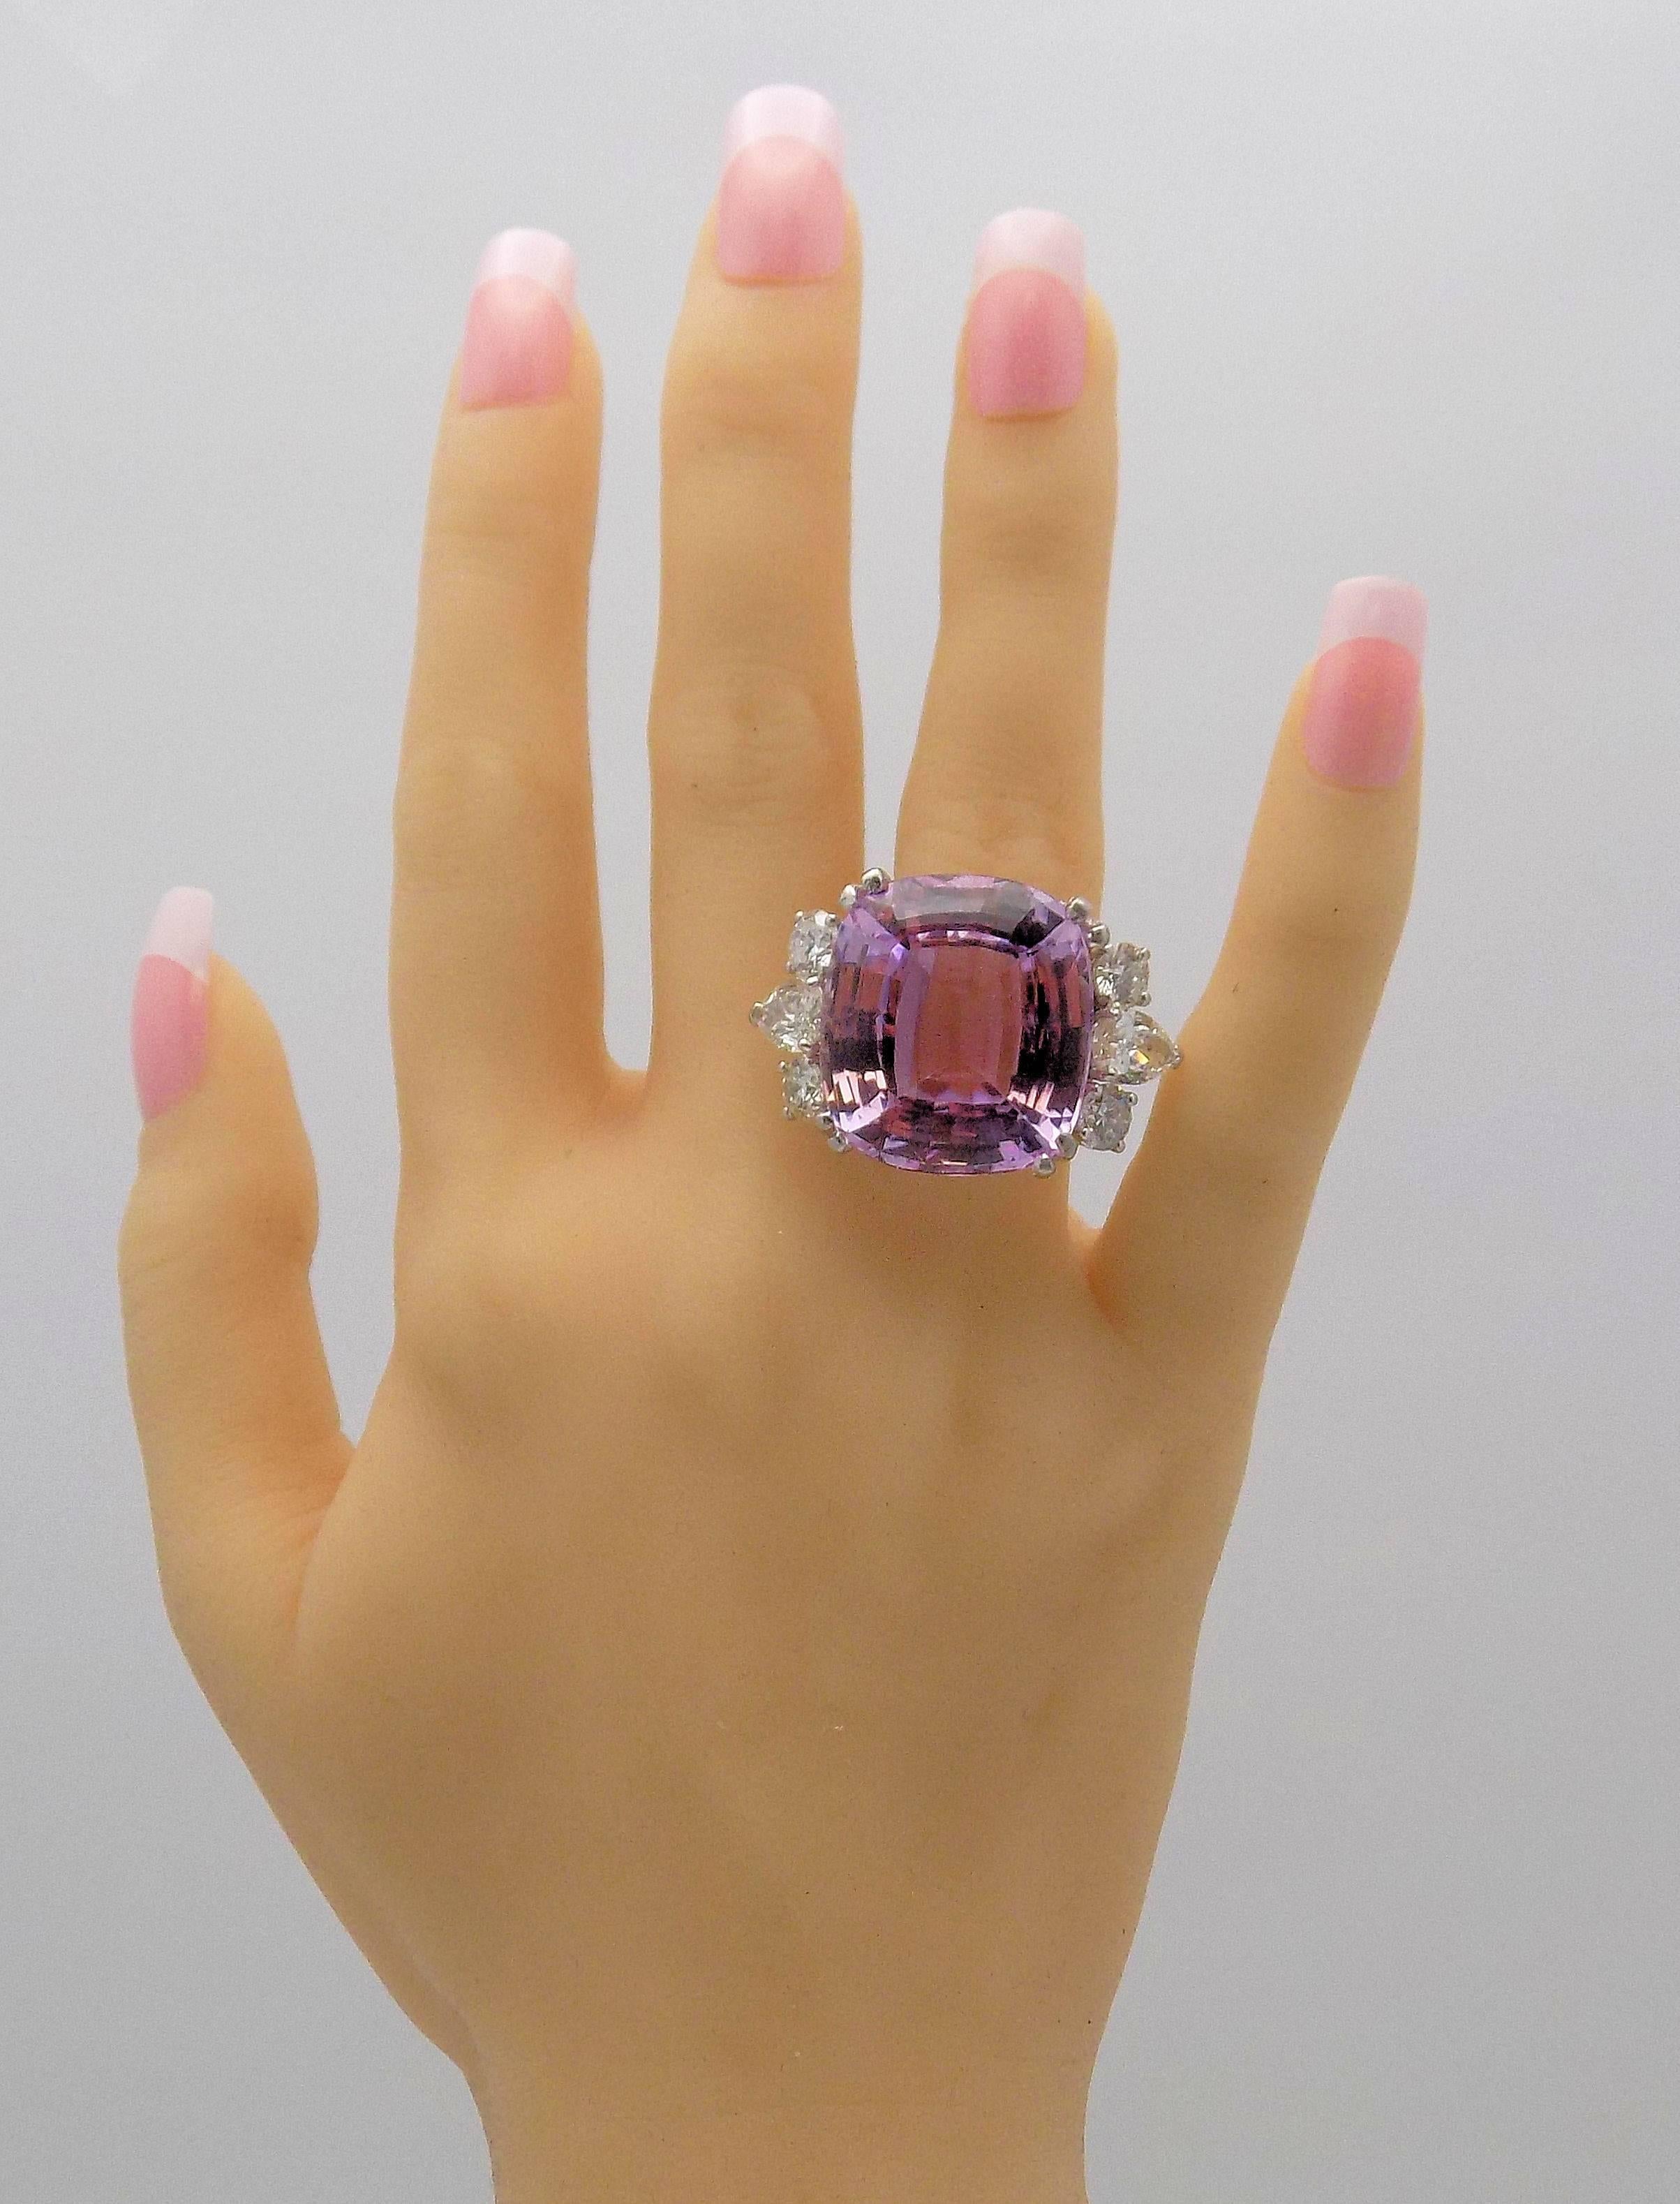 Platinum and 14 Karat White Gold Ring Featuring 1 Cushion Cut Kunzite 45.6 Carat; 2 Pear Shape Diamonds and 4 Round Diamonds totaling 4 Carat Total Weight SI2 - 2I3, H-J; Finger Size 7.5; 15.4 DWT or 23.95 Grams.